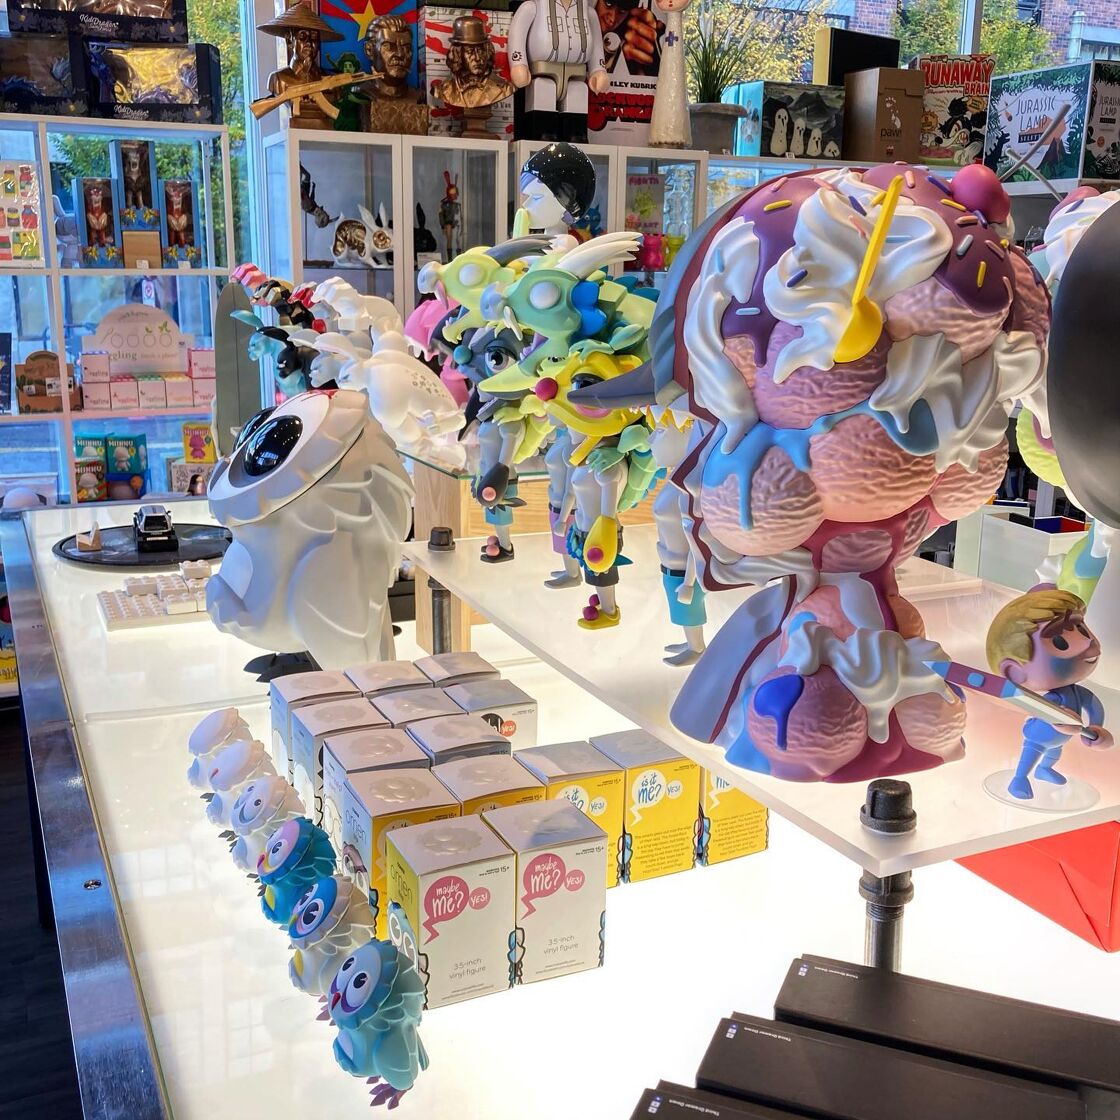 A countertop at Cult with various items displayed for sale.